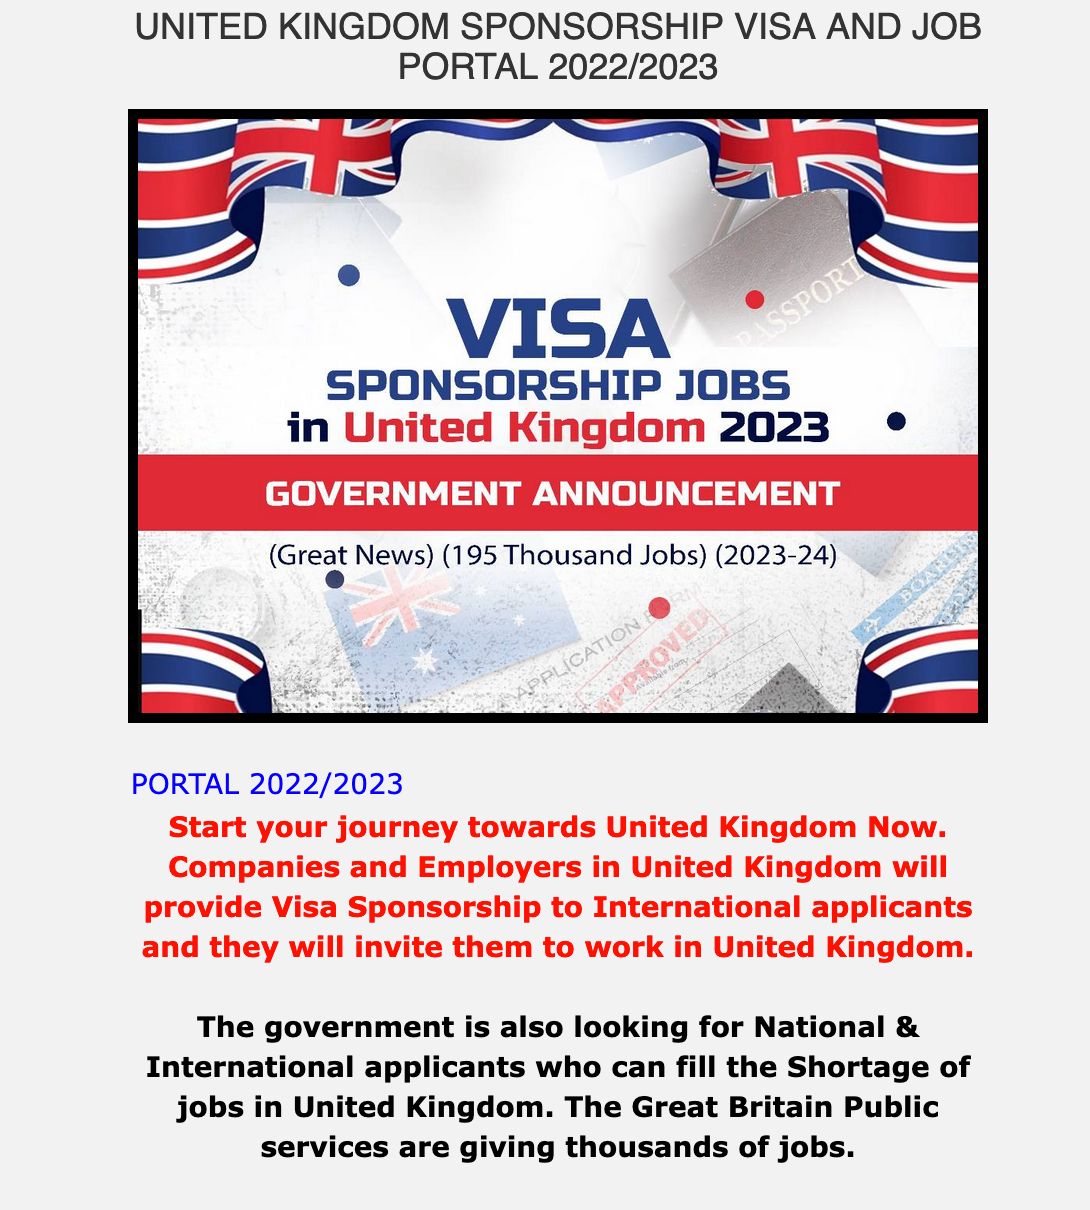 HOAX: Website promoting a UK sponsorship visa and jobs programme is a scam  | by PesaCheck | PesaCheck